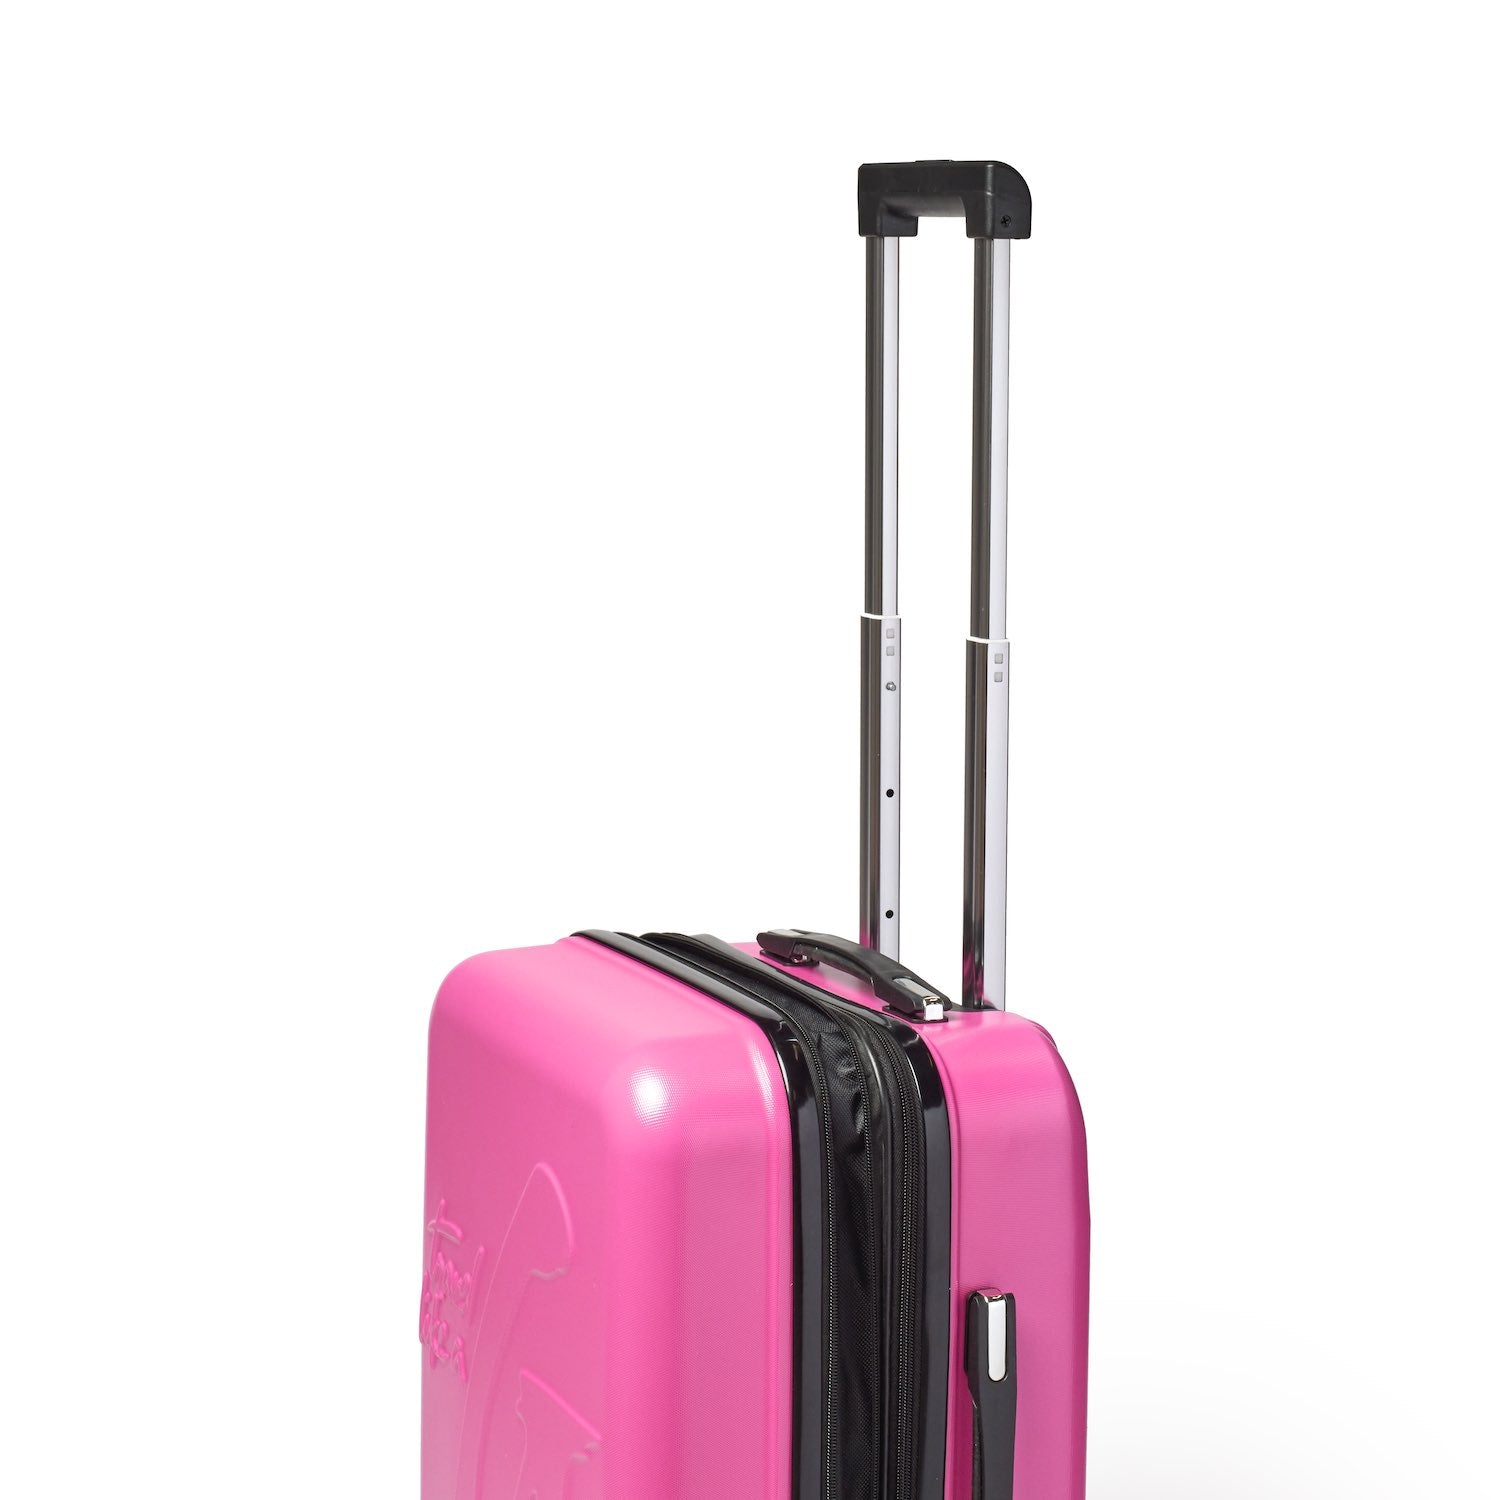 STANDARD CARRY-ON LUGGAGE HOT PINK